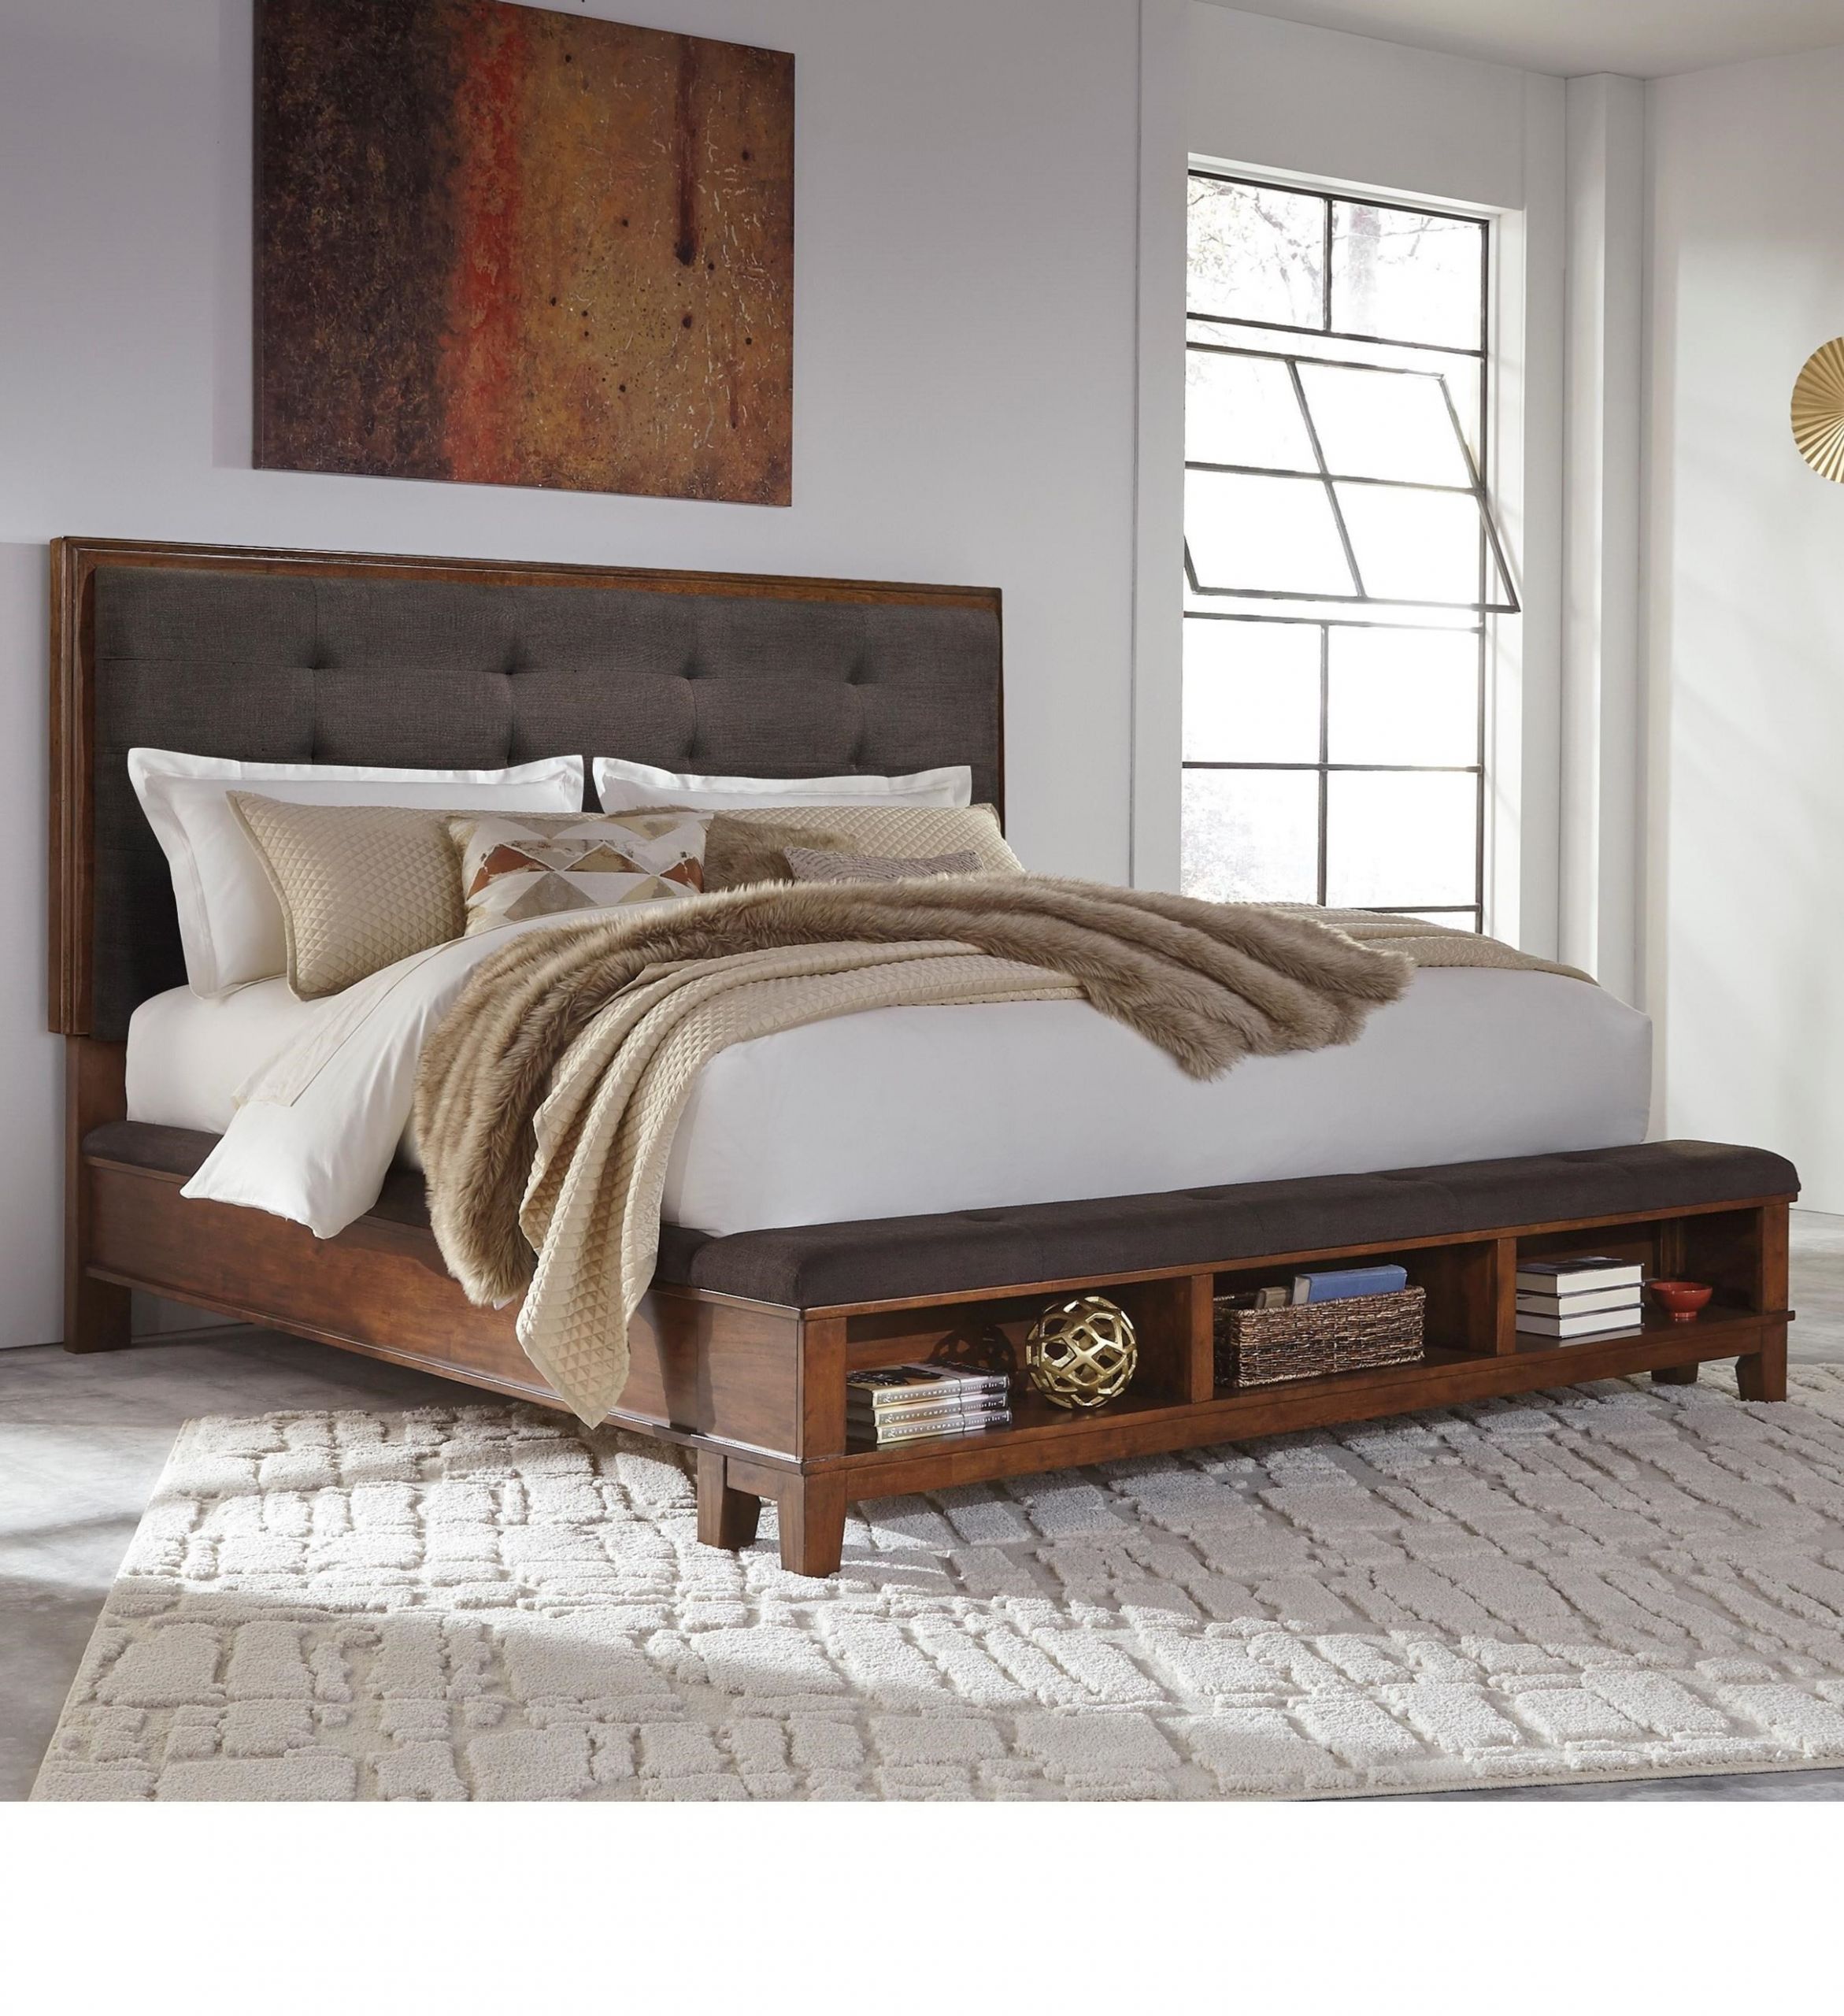 King Size Bed Storage Bench
 Signature Design by Ashley Ralene King Upholstered Bed